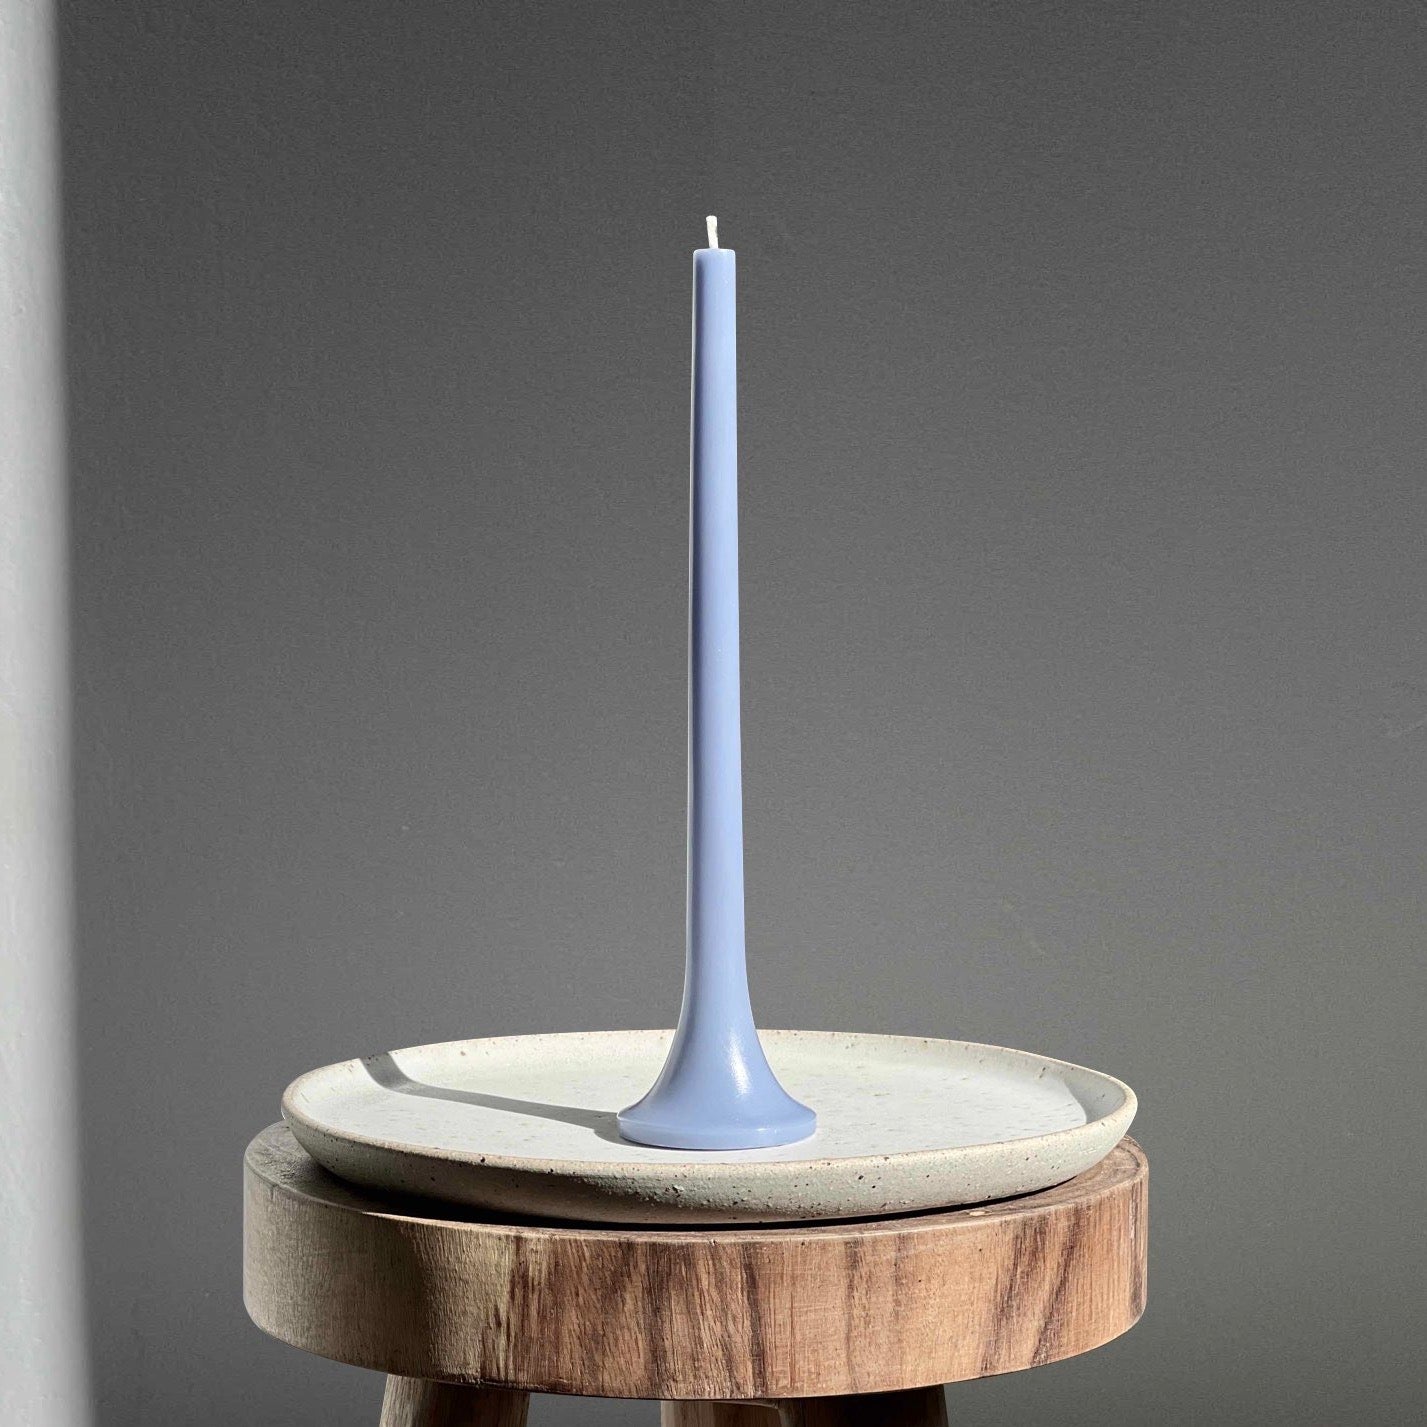 Tall blue dinner candle